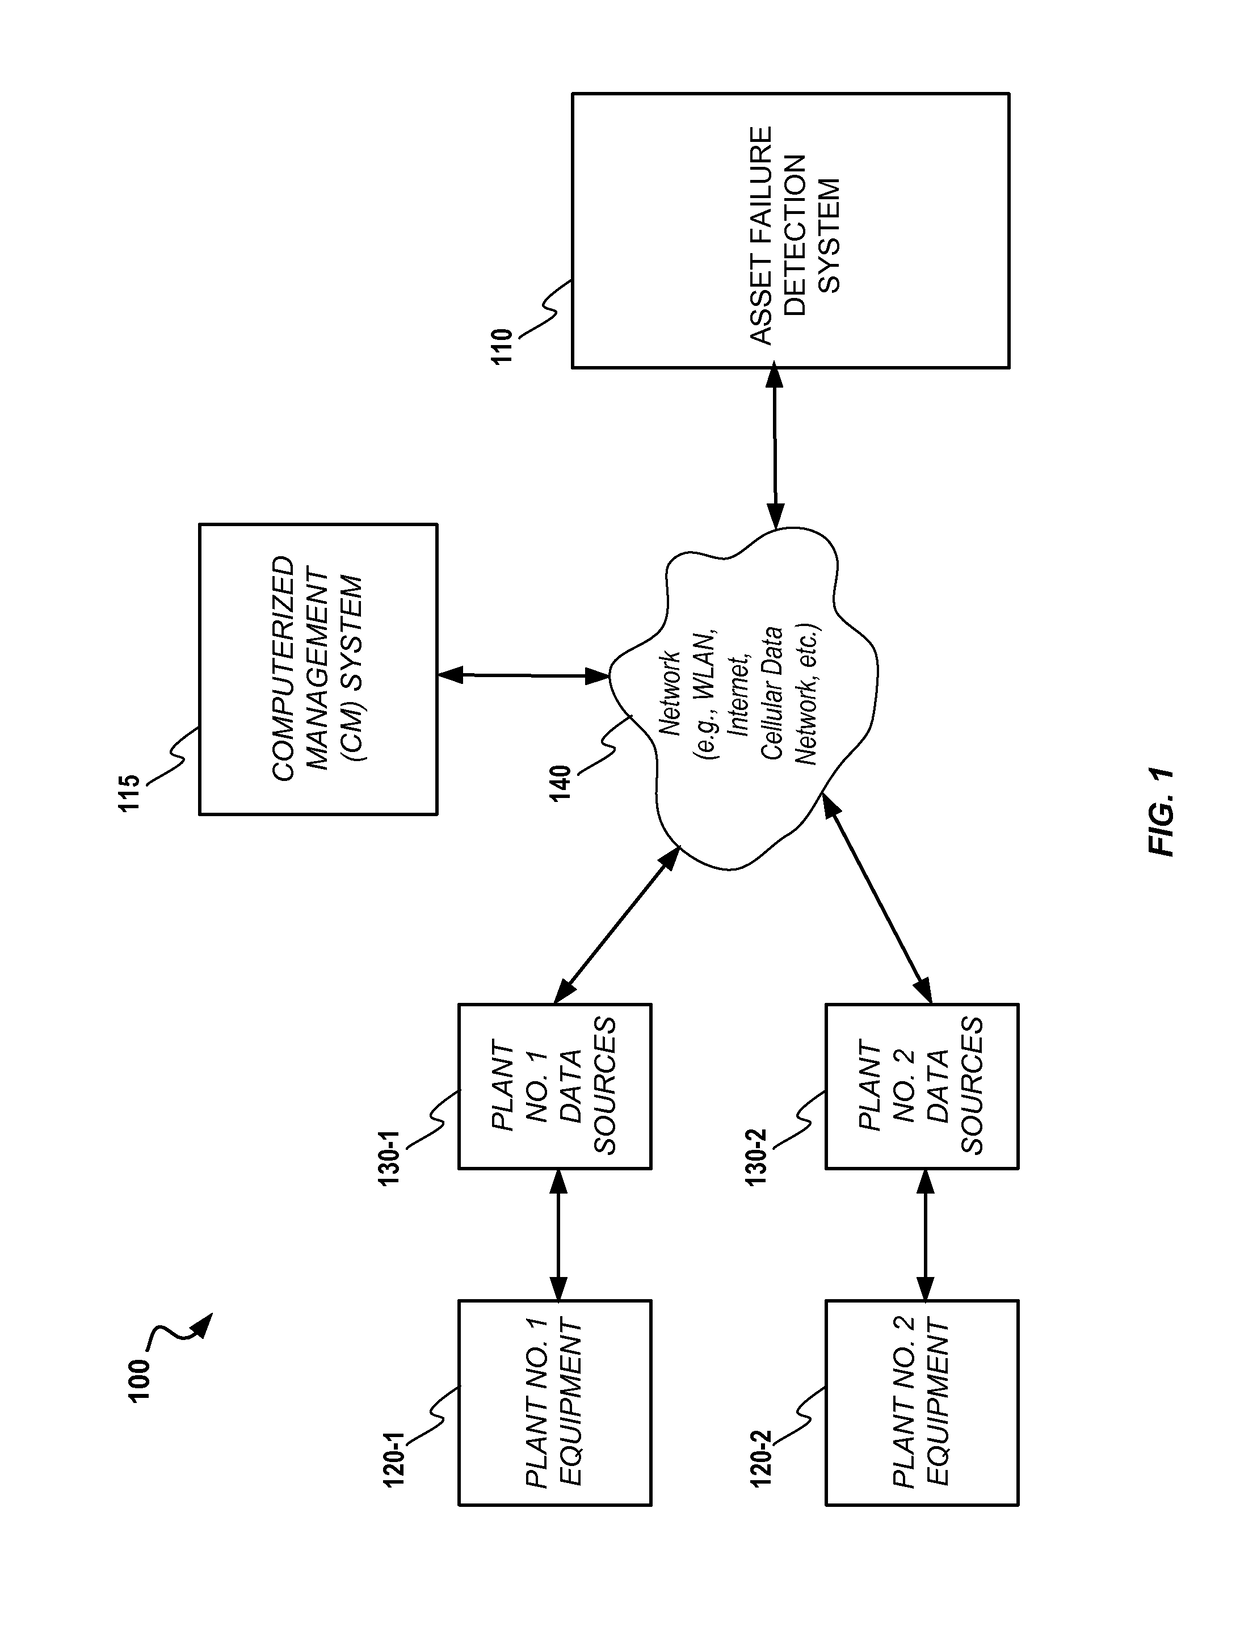 System and Methods for Automated Plant Asset Failure Detection